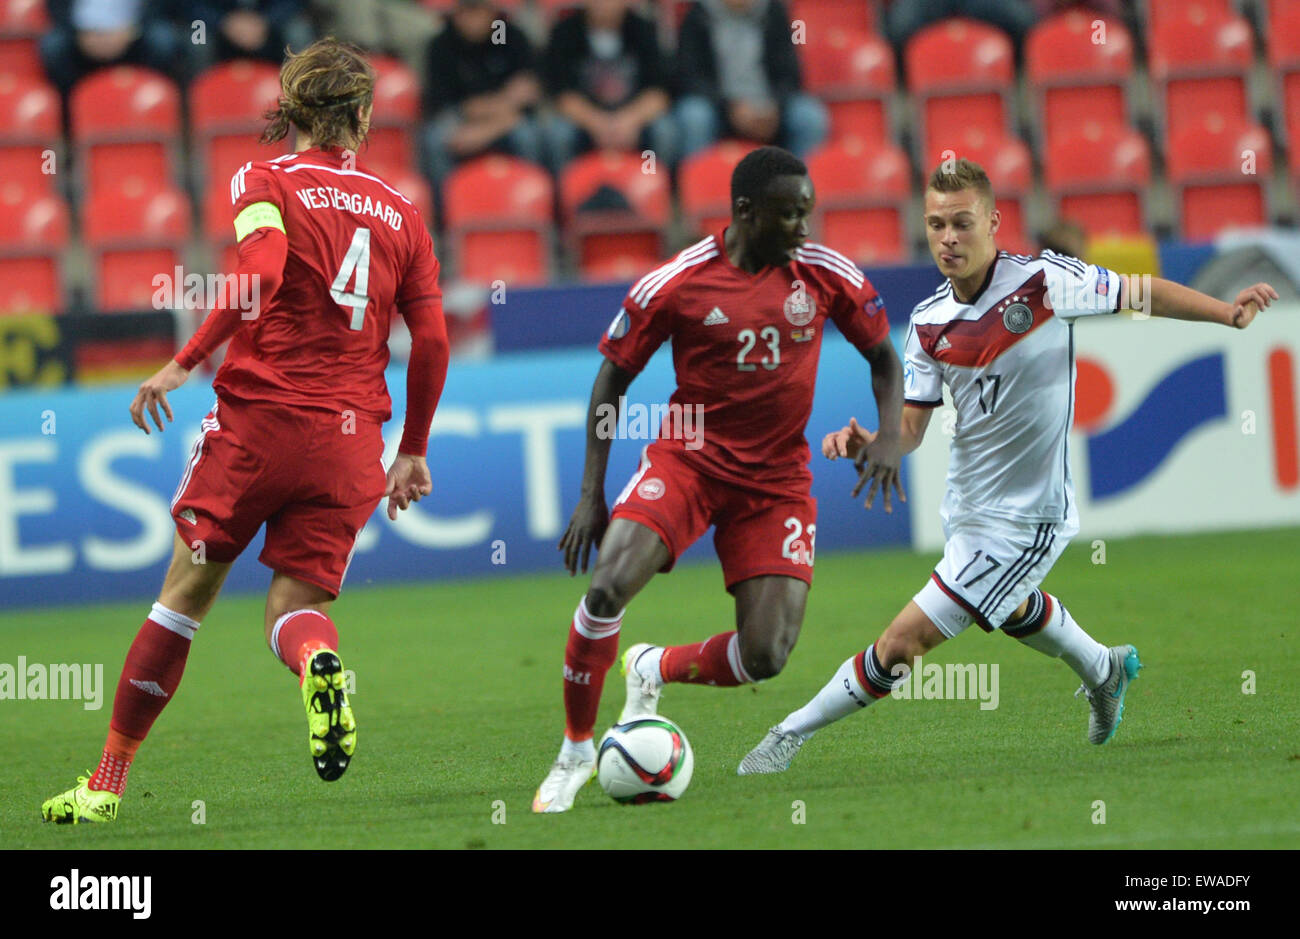 Prague, Czech Republic. 20th June, 2015. Germany's Joshua Kimmich (r) and Jannik Vestergaard (l) and Pione Sisto (M) of Denmark vie for the ball during the UEFA Under-21 European Championships 2015 group A soccer match between Germany and Denmark at Eden Stadium in Prague, Czech Republic, 20 June 2015. Photo: Peter Kneffel/dpa/Alamy Live News Stock Photo